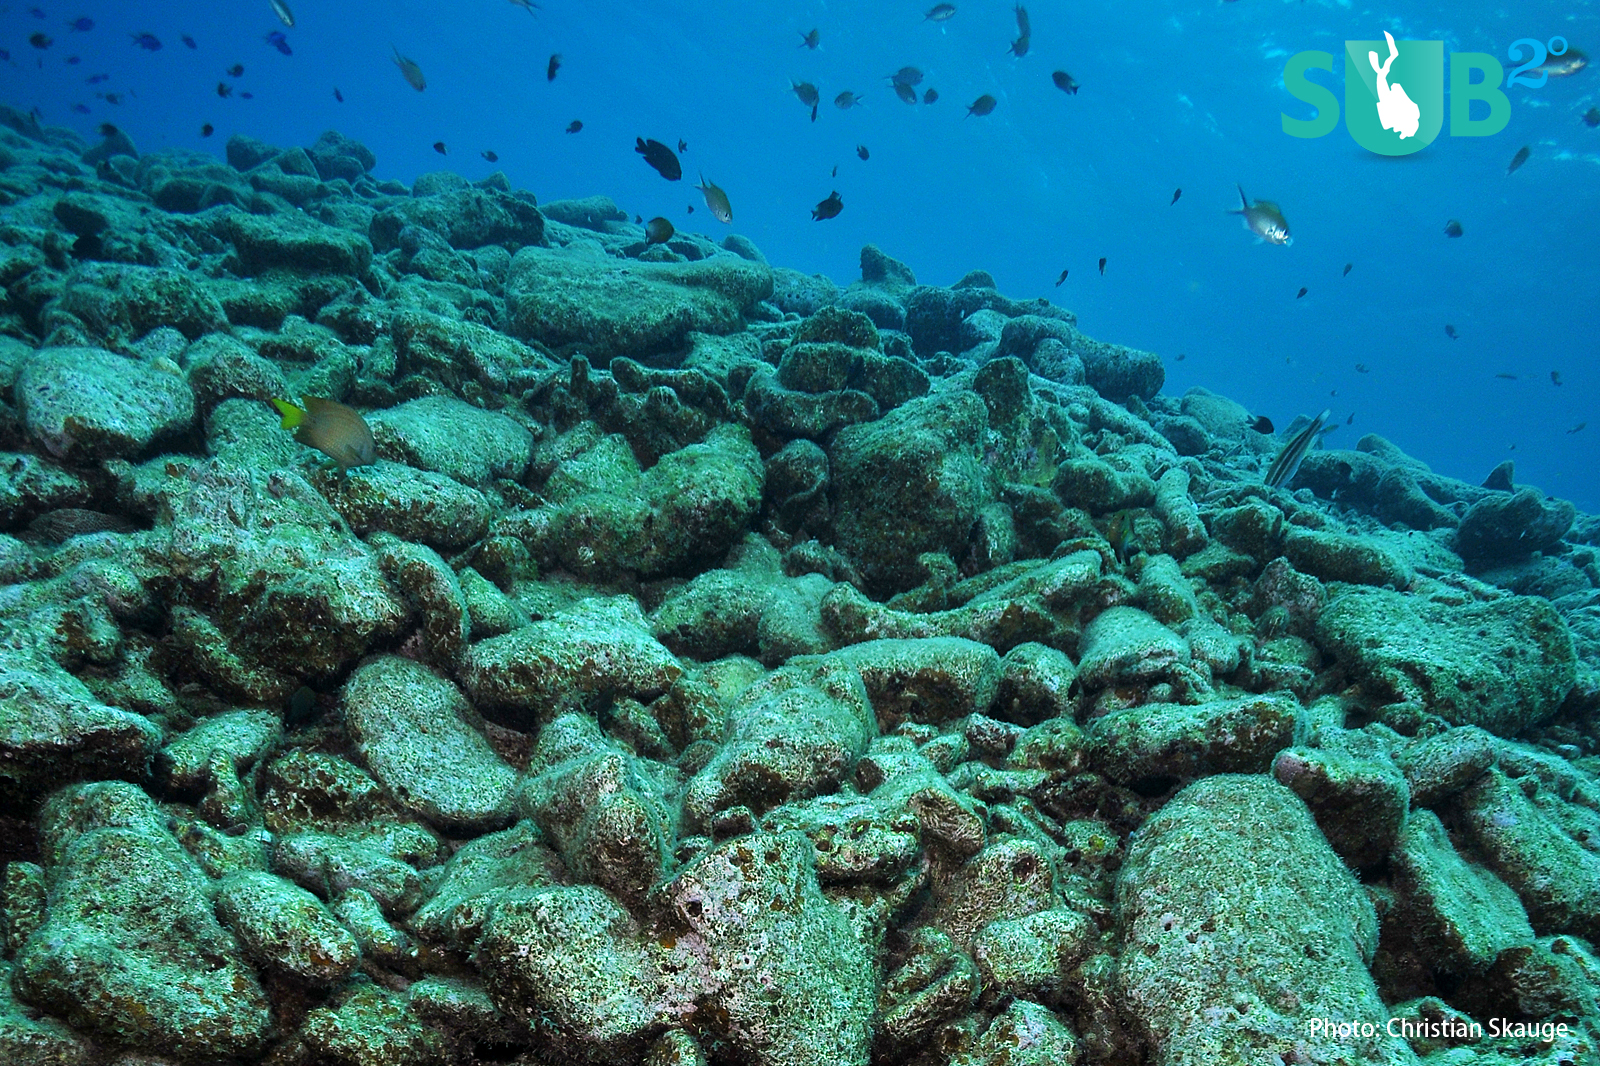 The remains of a dead coral reef